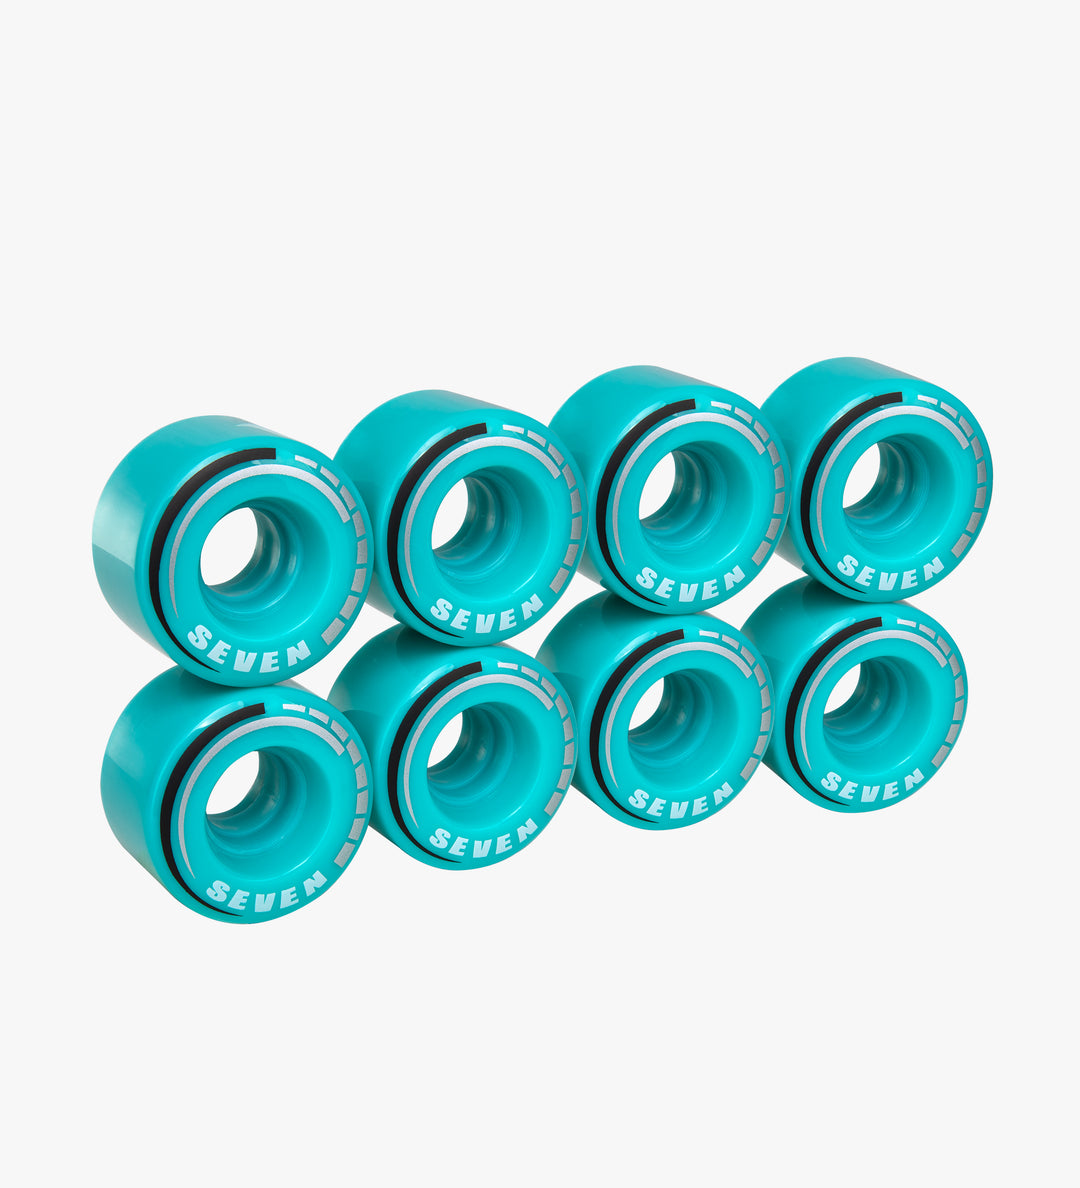 Teal C7 roller skate wheels made from durable 82A polyurethane with a 58 mm diameter and 32 mm width